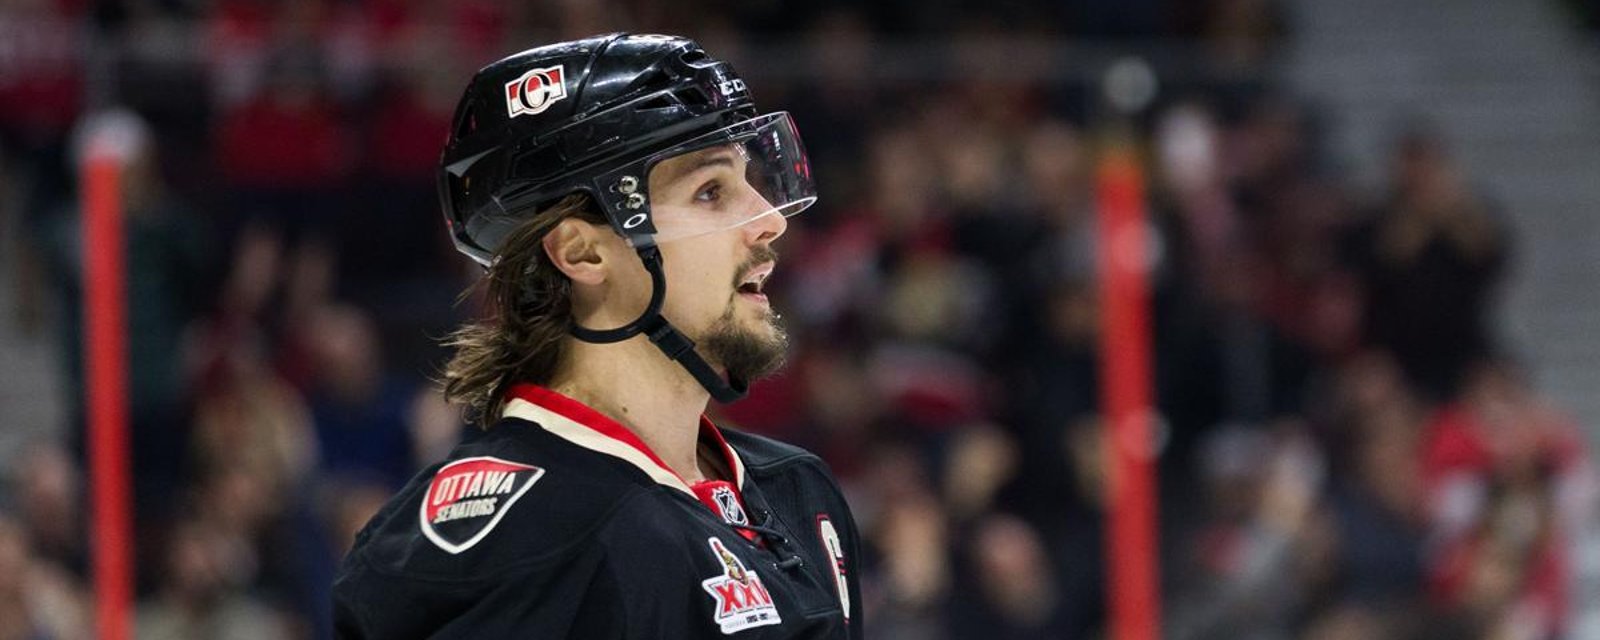 Karlsson has surprising comments on Crosby's slash. 